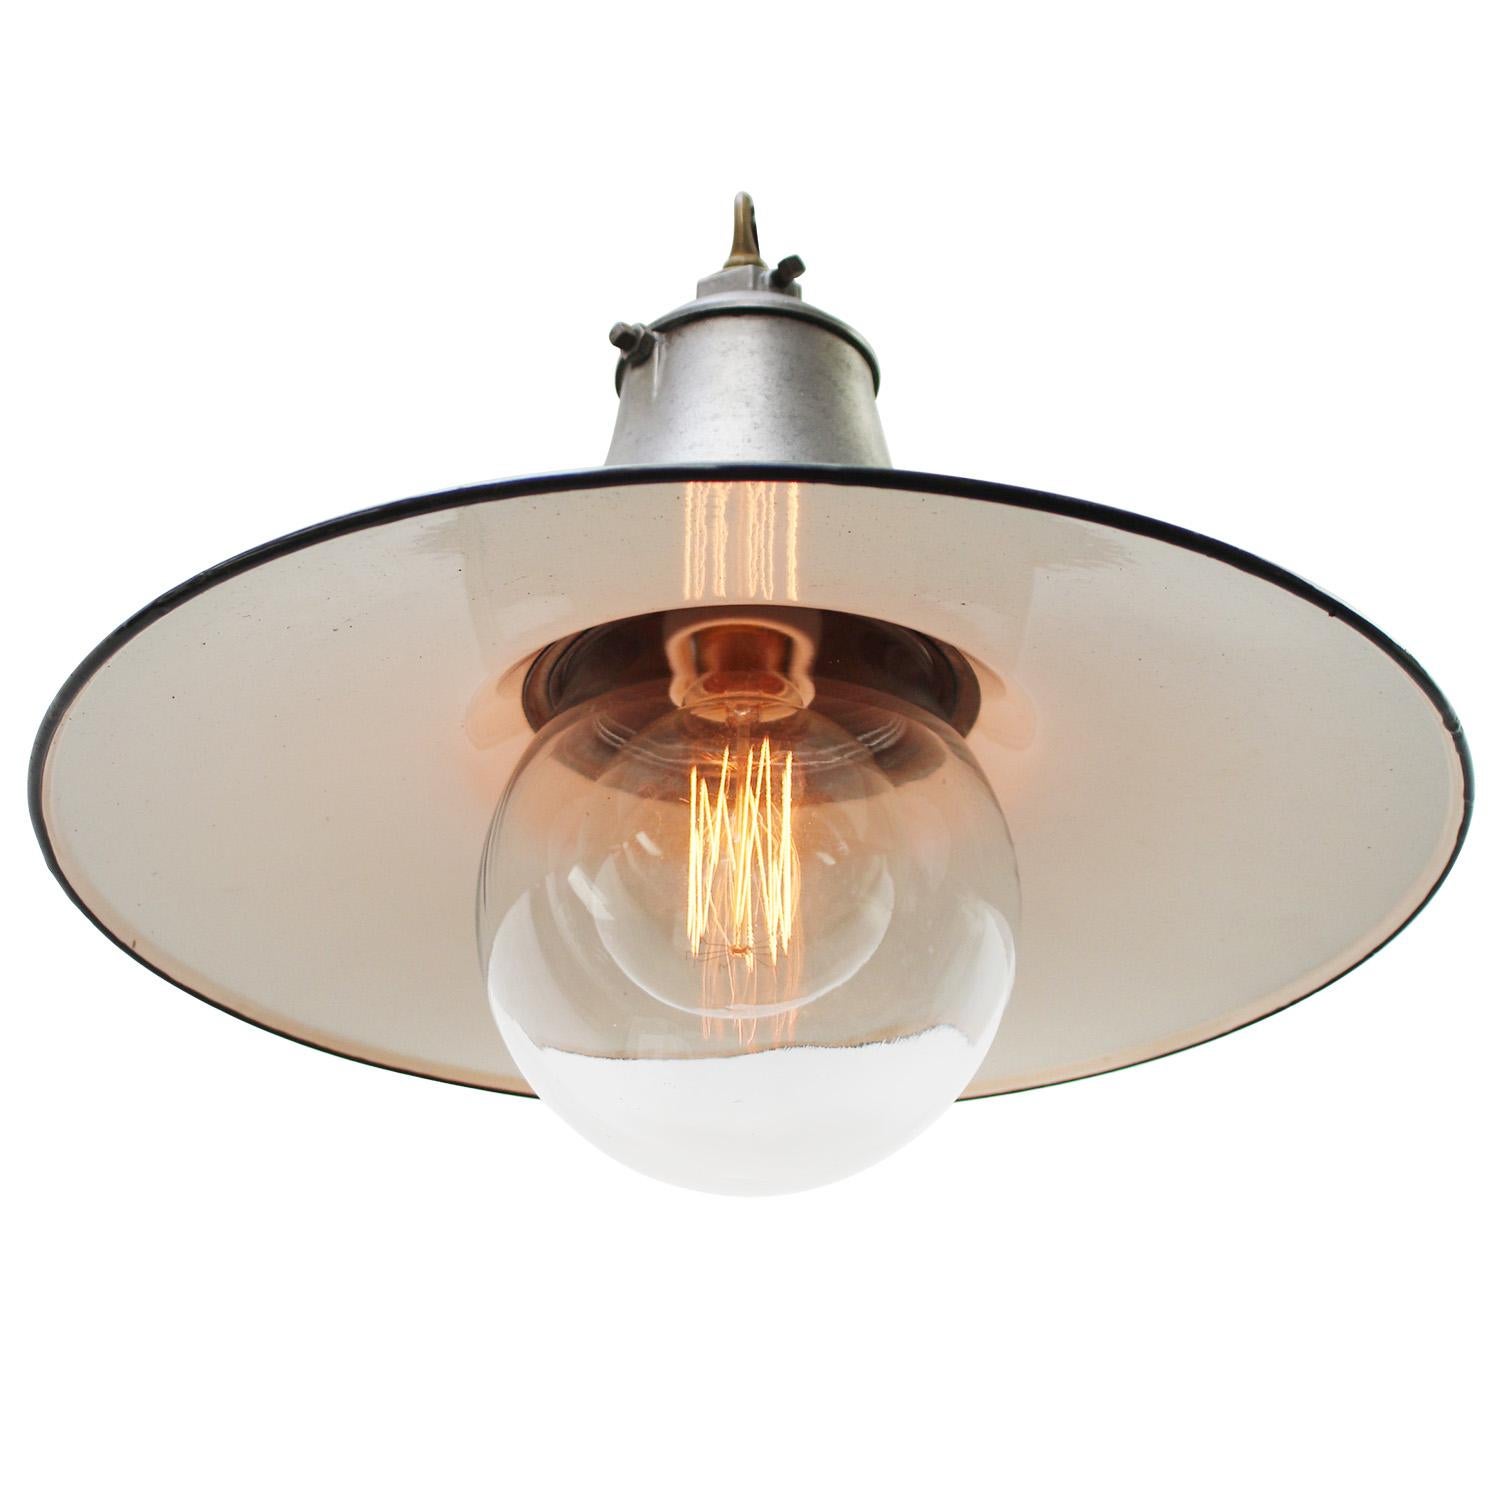 American Industrial factory pendant light
Green enamel white interior.
Clear glass, cast aluminum top

Weight 3.20 kg / 7.1 lb

Priced per individual item. All lamps have been made suitable by international standards for incandescent light bulbs,